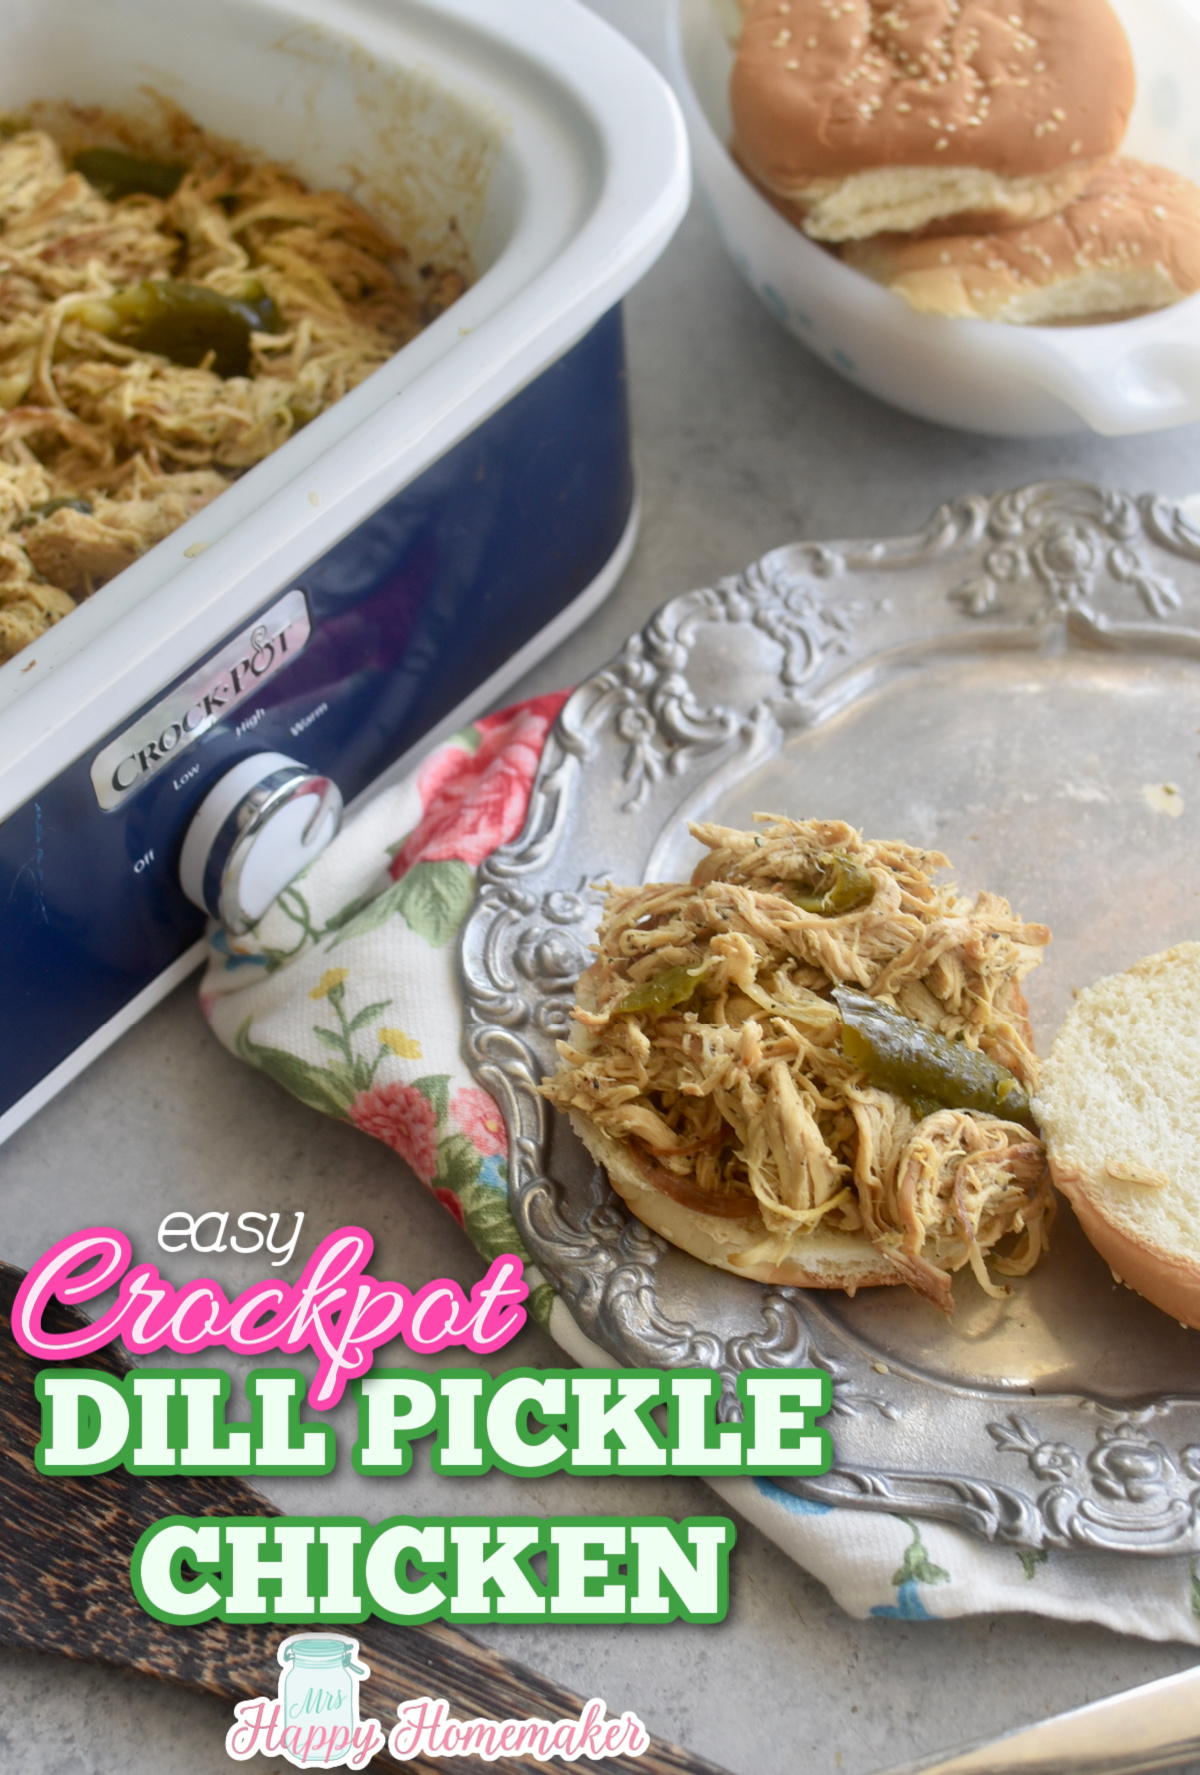 Dill Pickle chicken in a crockpot and piled on a bun thats on a plate beside the crockpot